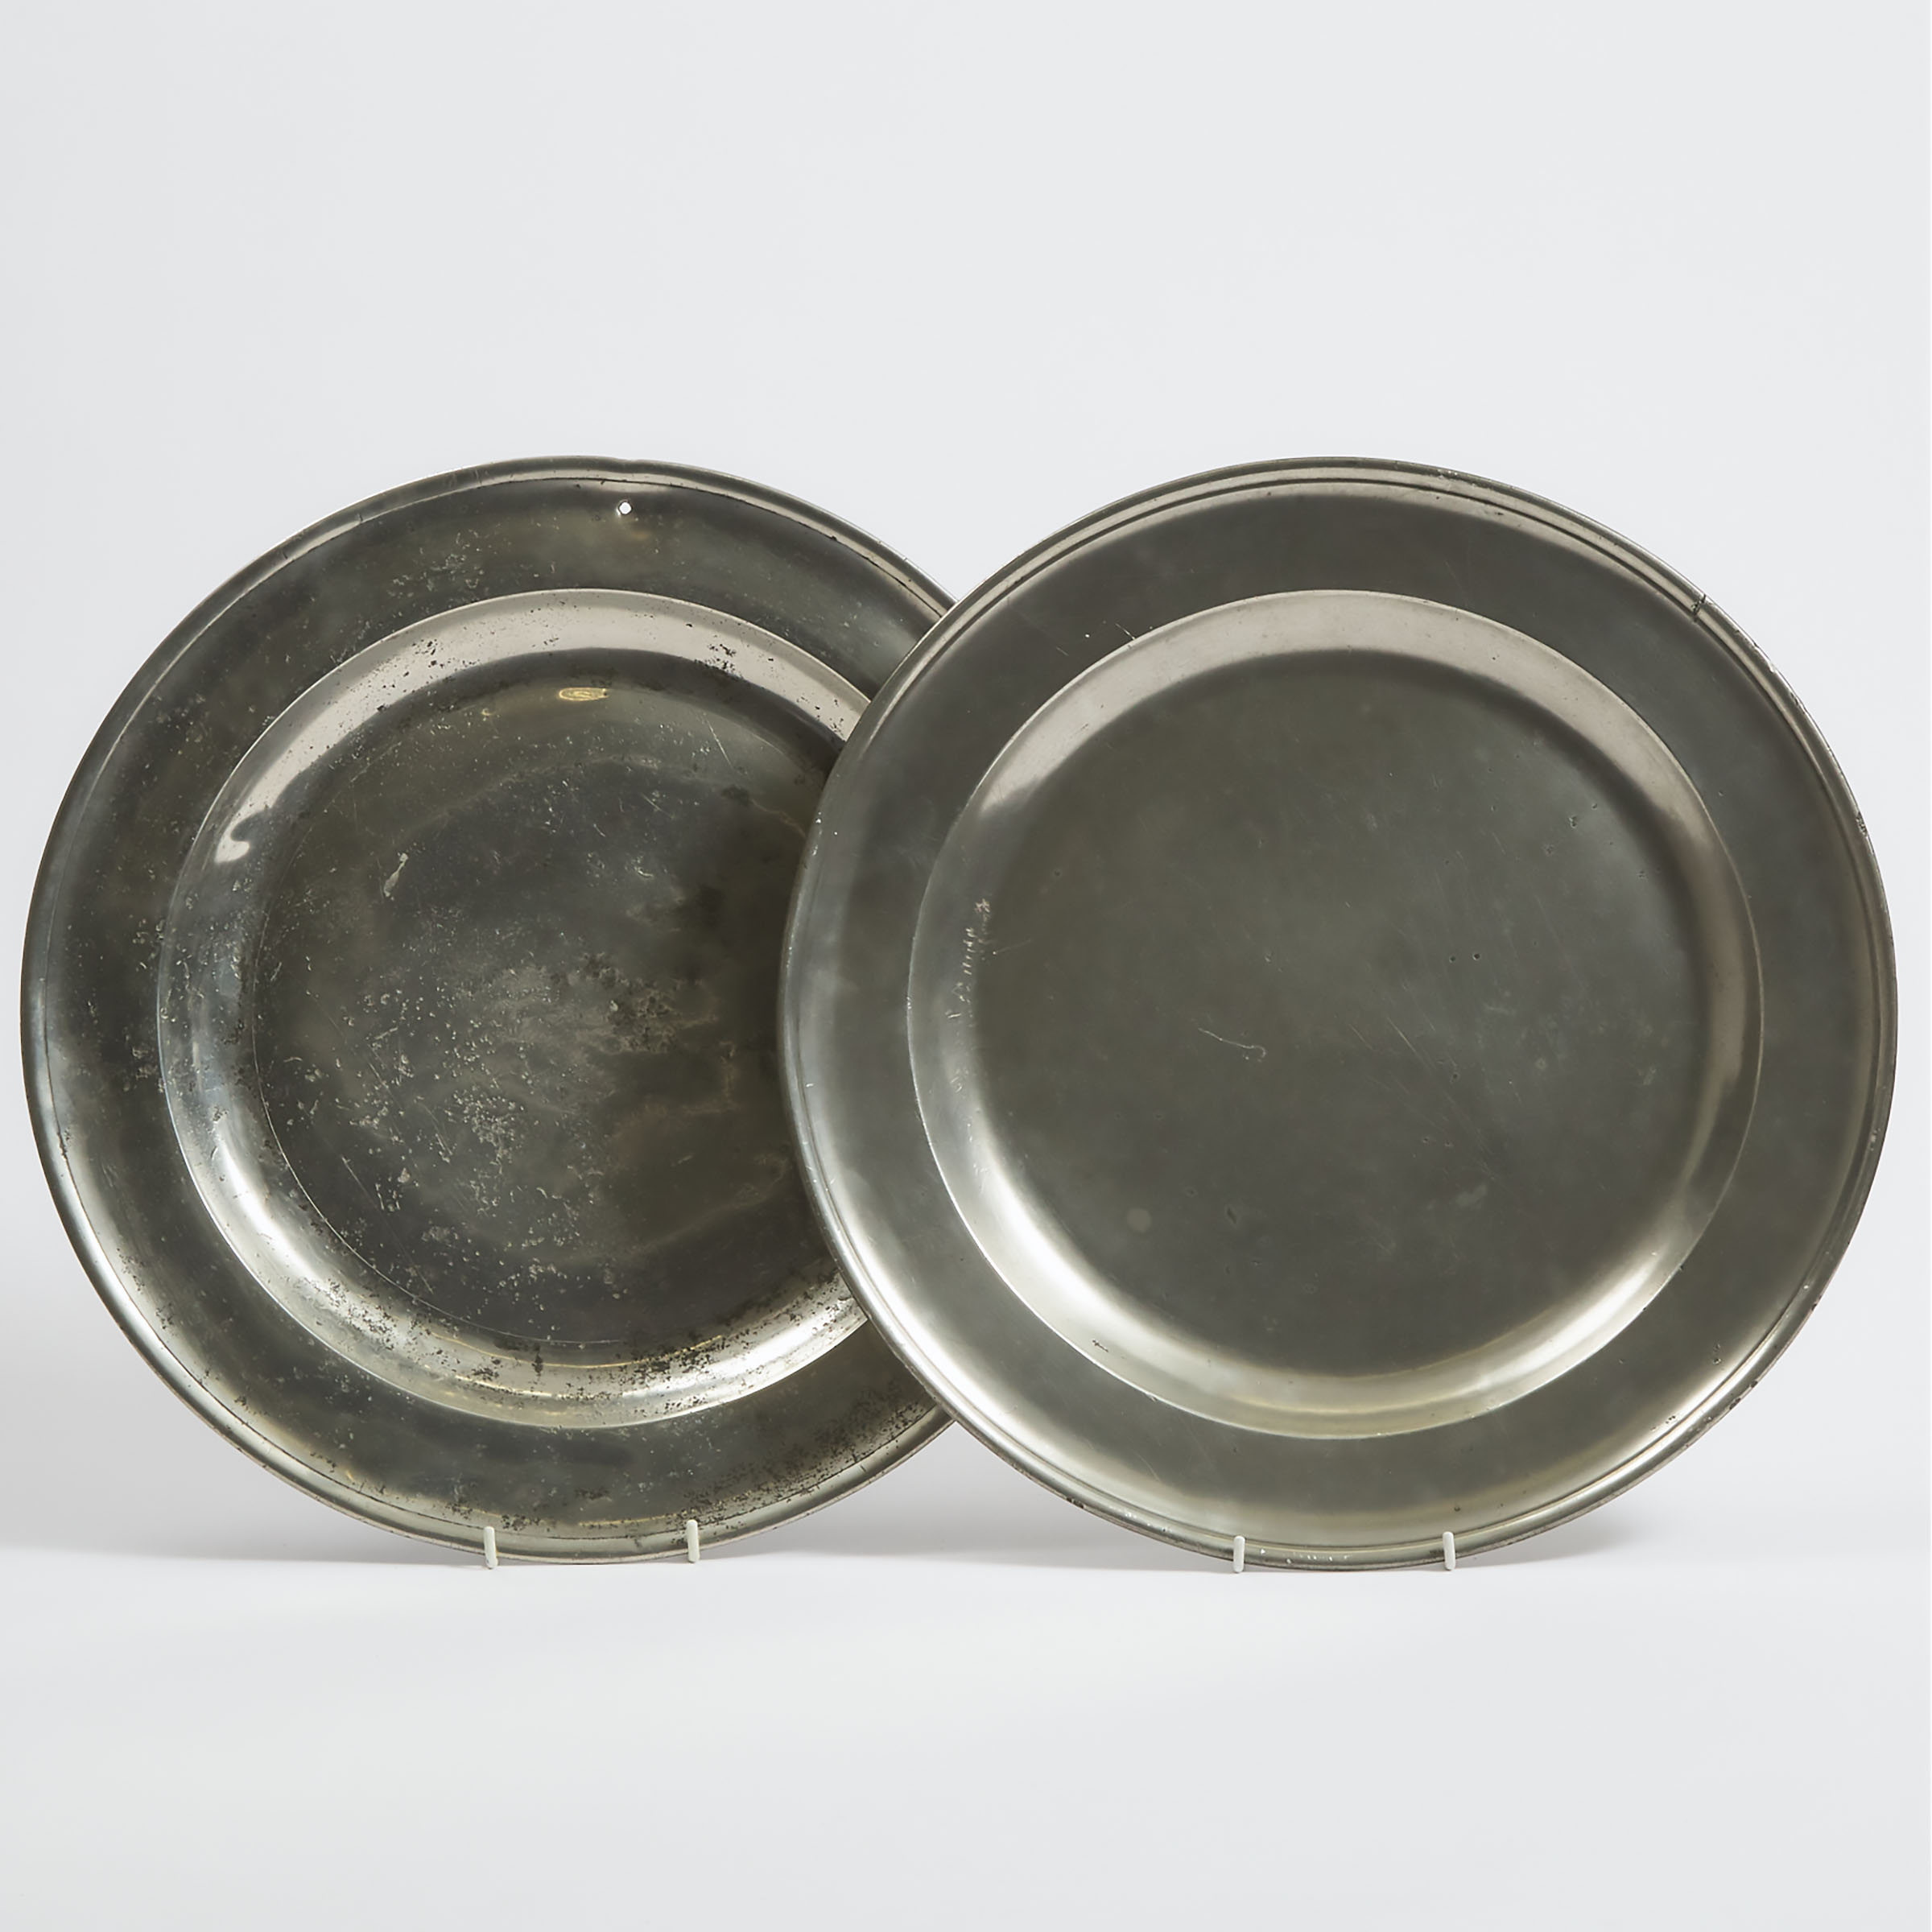 Two English Pewter Single Reed Chargers, early 18th century